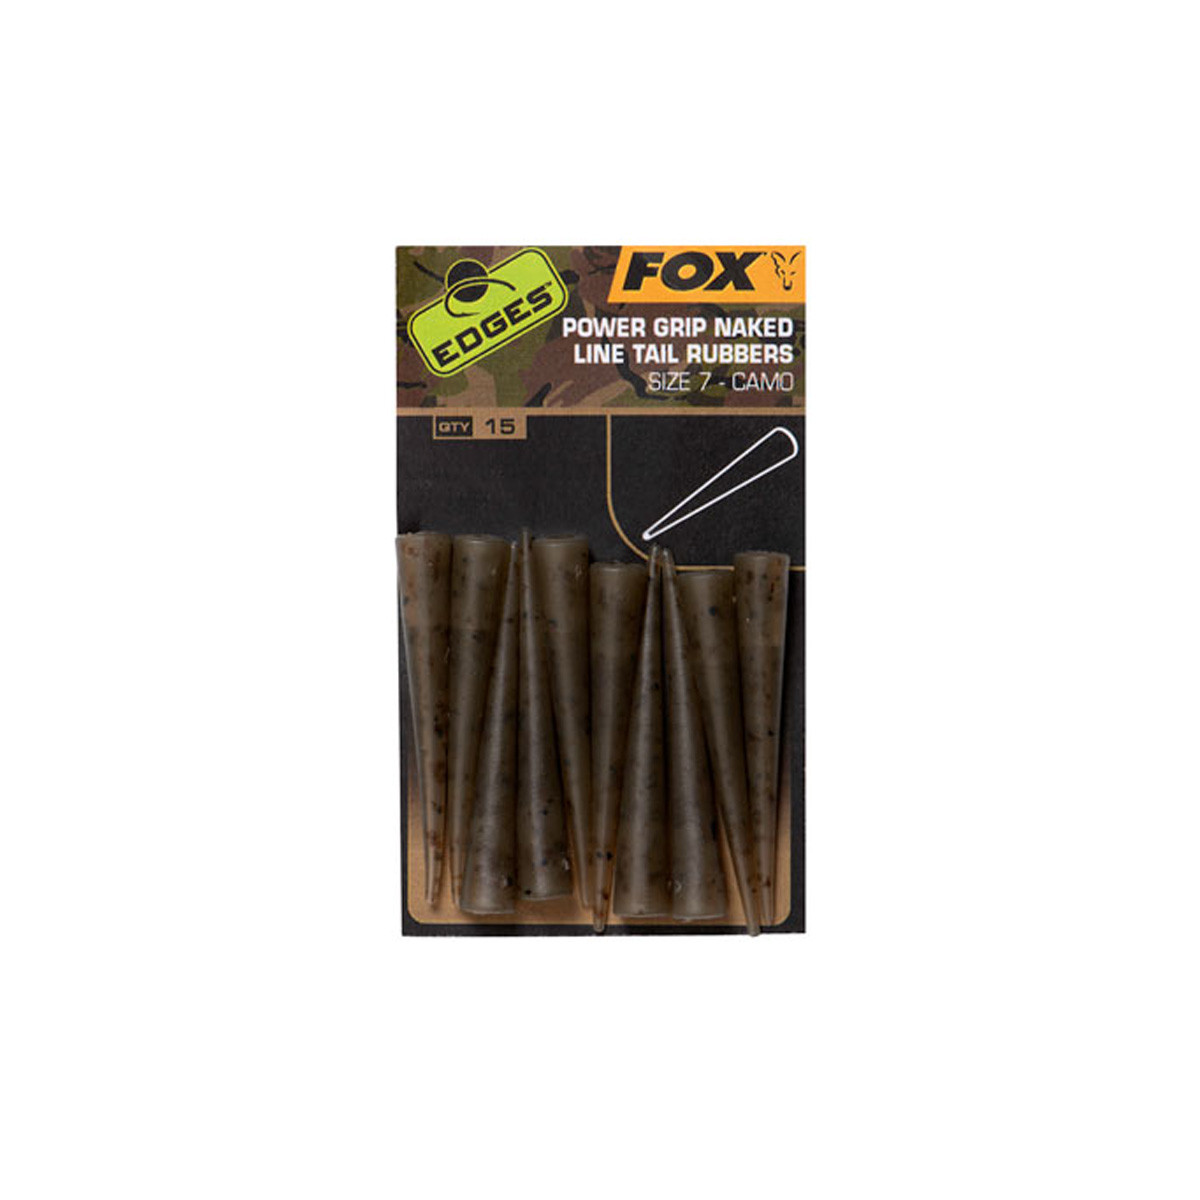 FOX EDGES CAMO POWER GRIP NAKED LINE TAIL RUBBERS